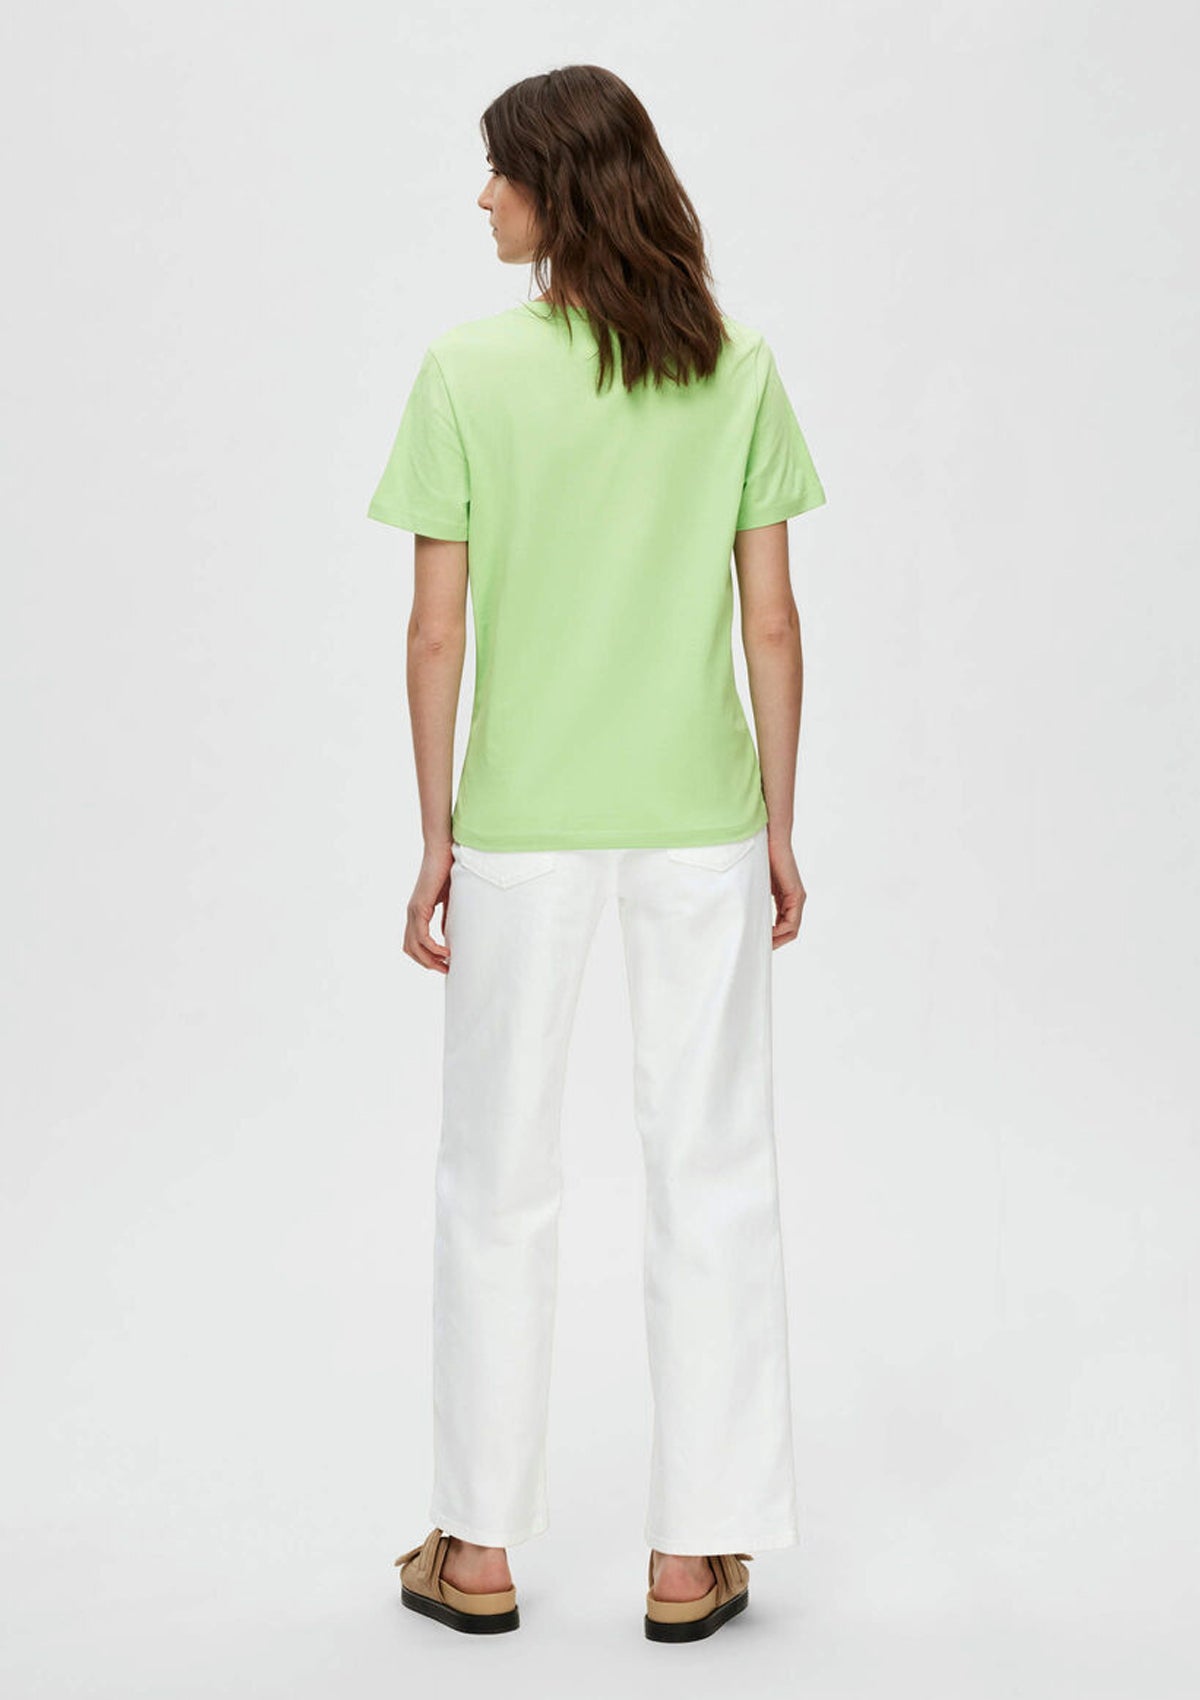 Selected Femme Essential V-neck Tee Pistachio Green